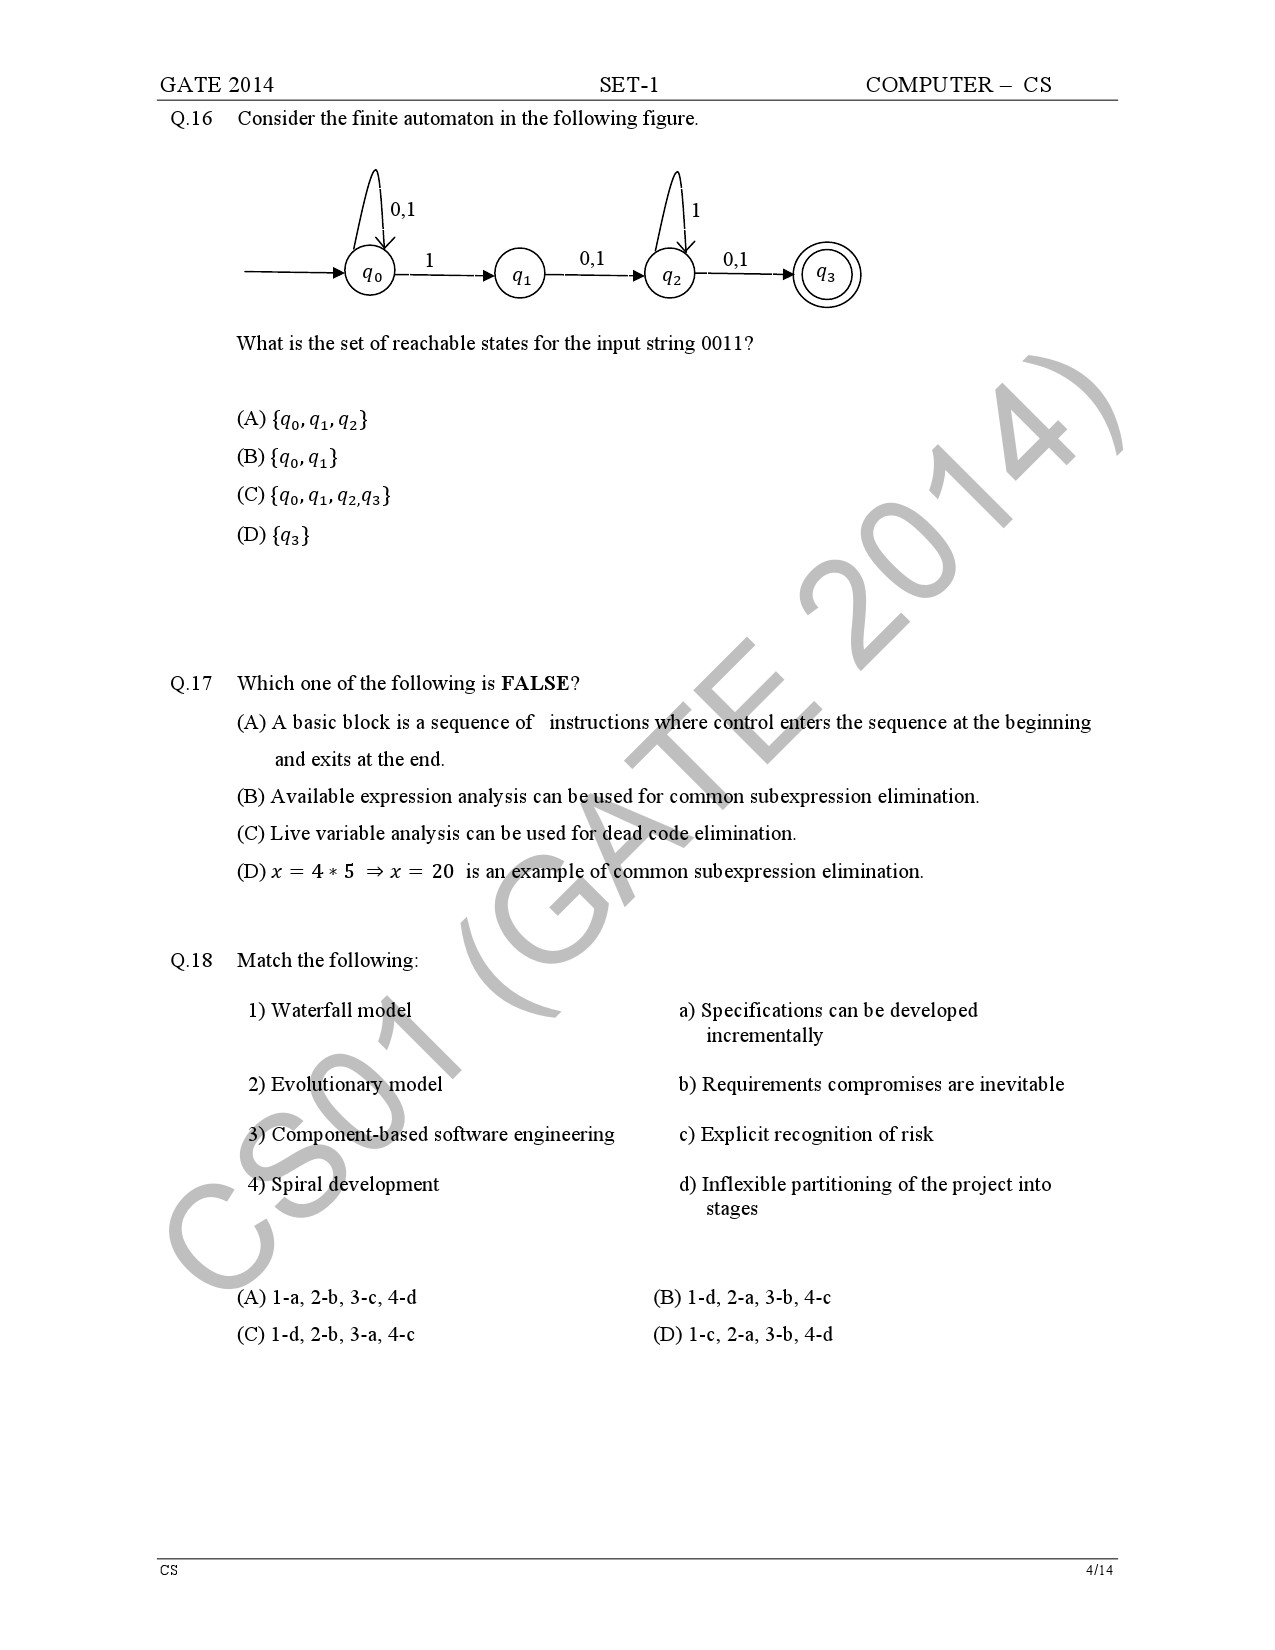 GATE Exam Question Paper 2014 Computer Science and Information Technology Set 1 10